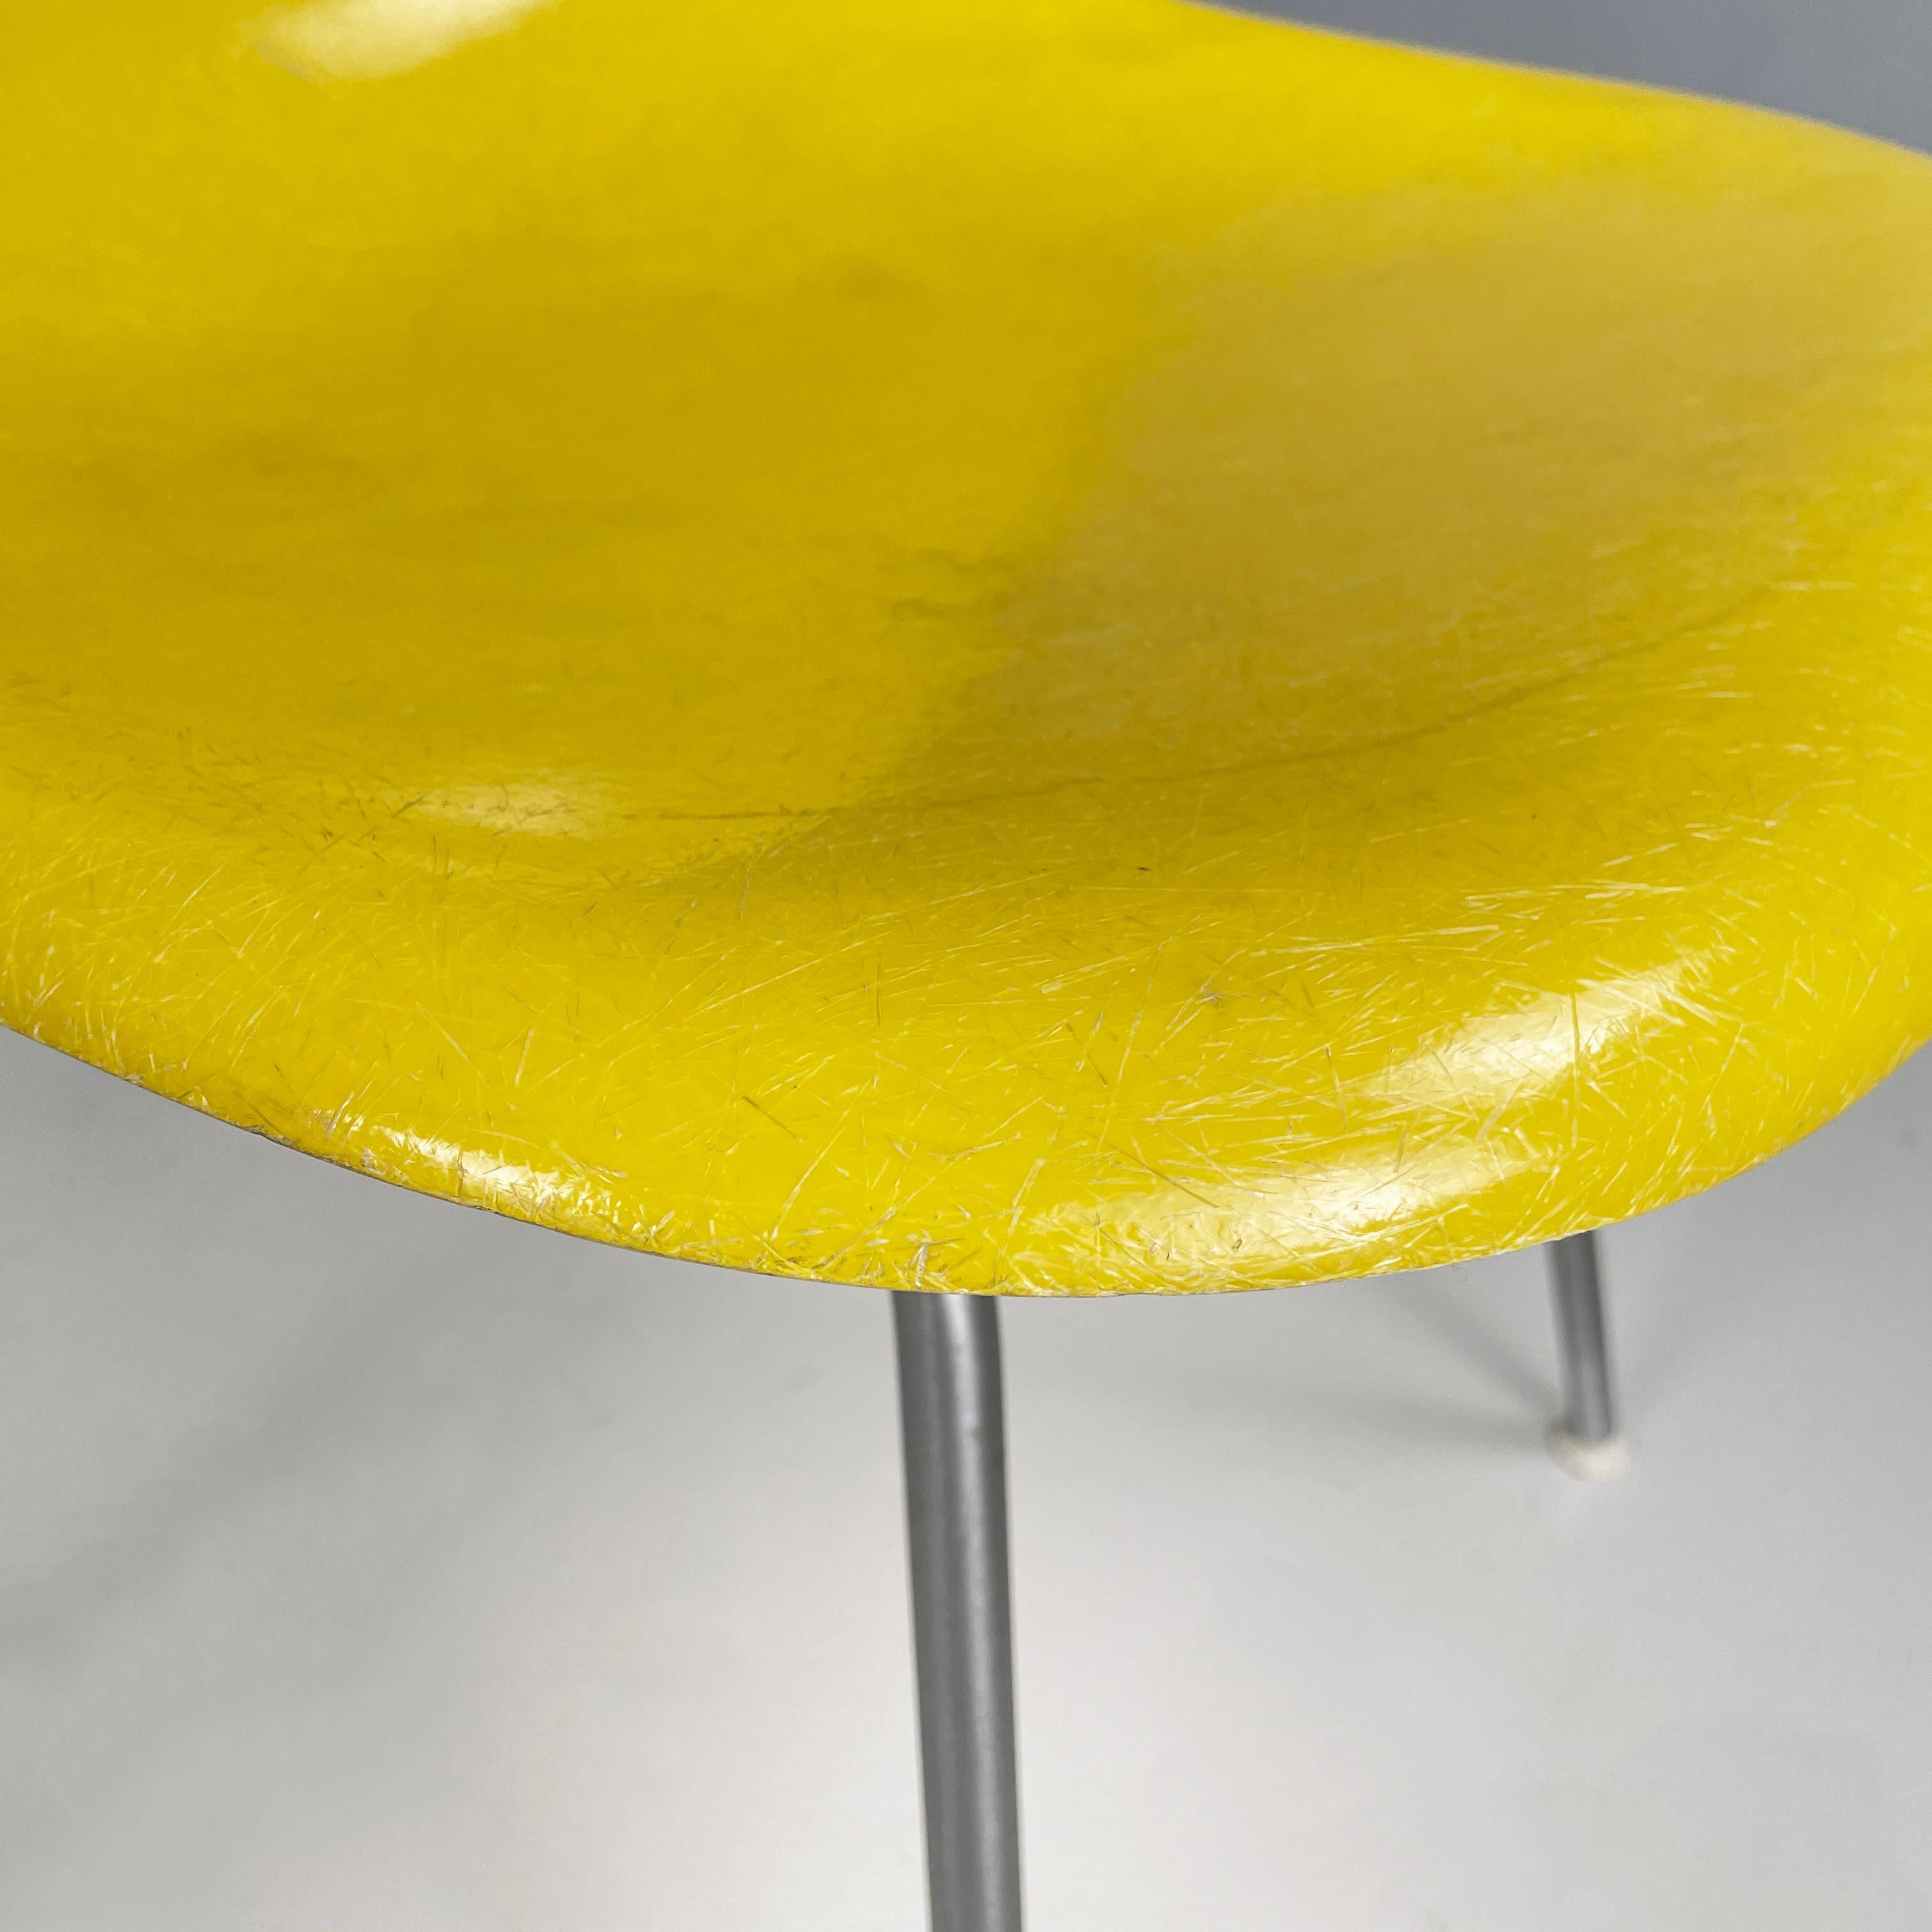 American Yellow Shell Chairs by Charles and Ray Eames for Herman Miller, 1970s For Sale 4